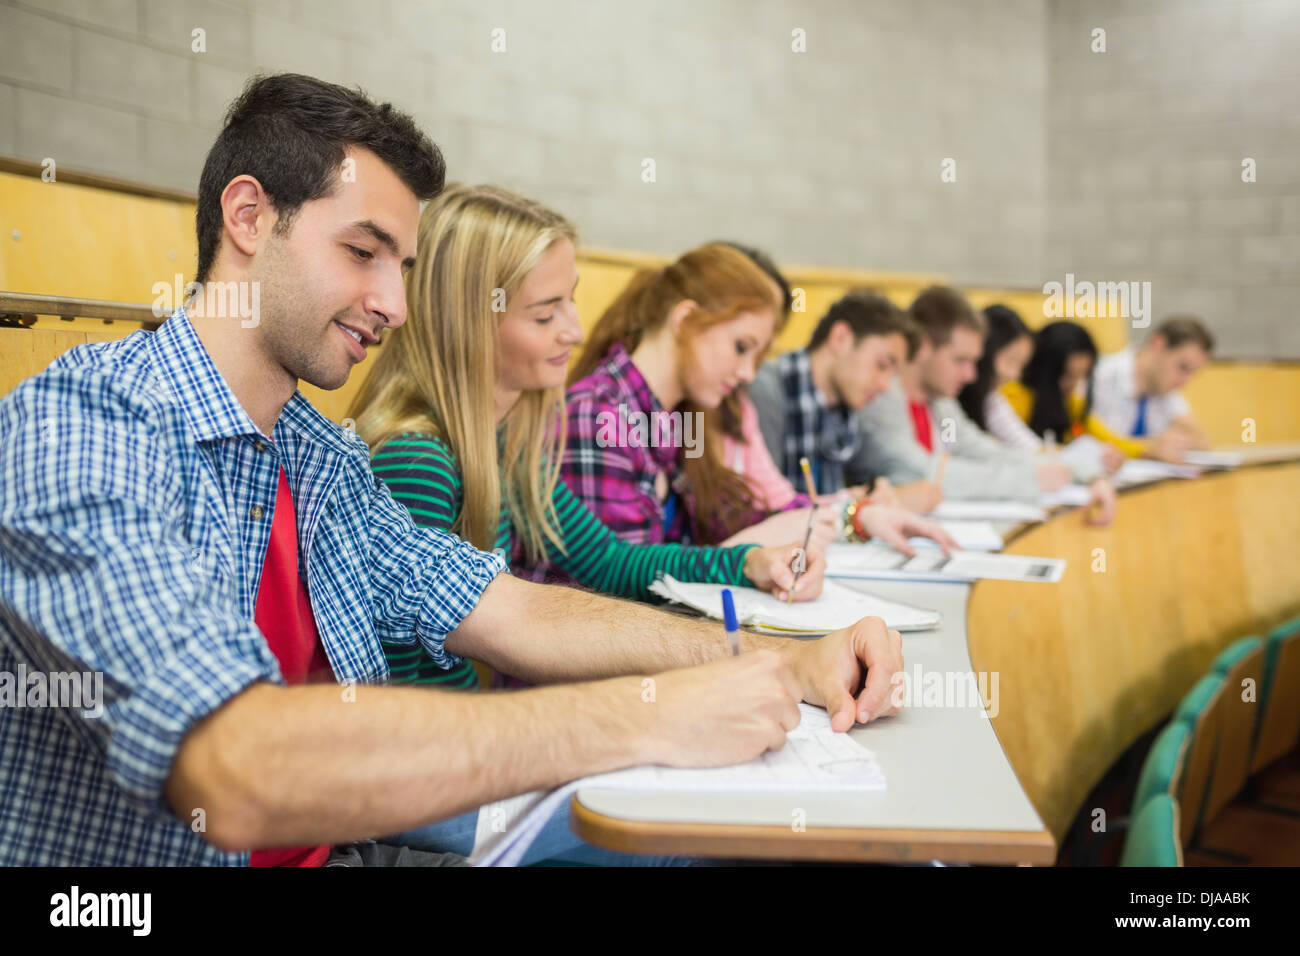 Students writing notes in a row at lecture hall Stock Photo